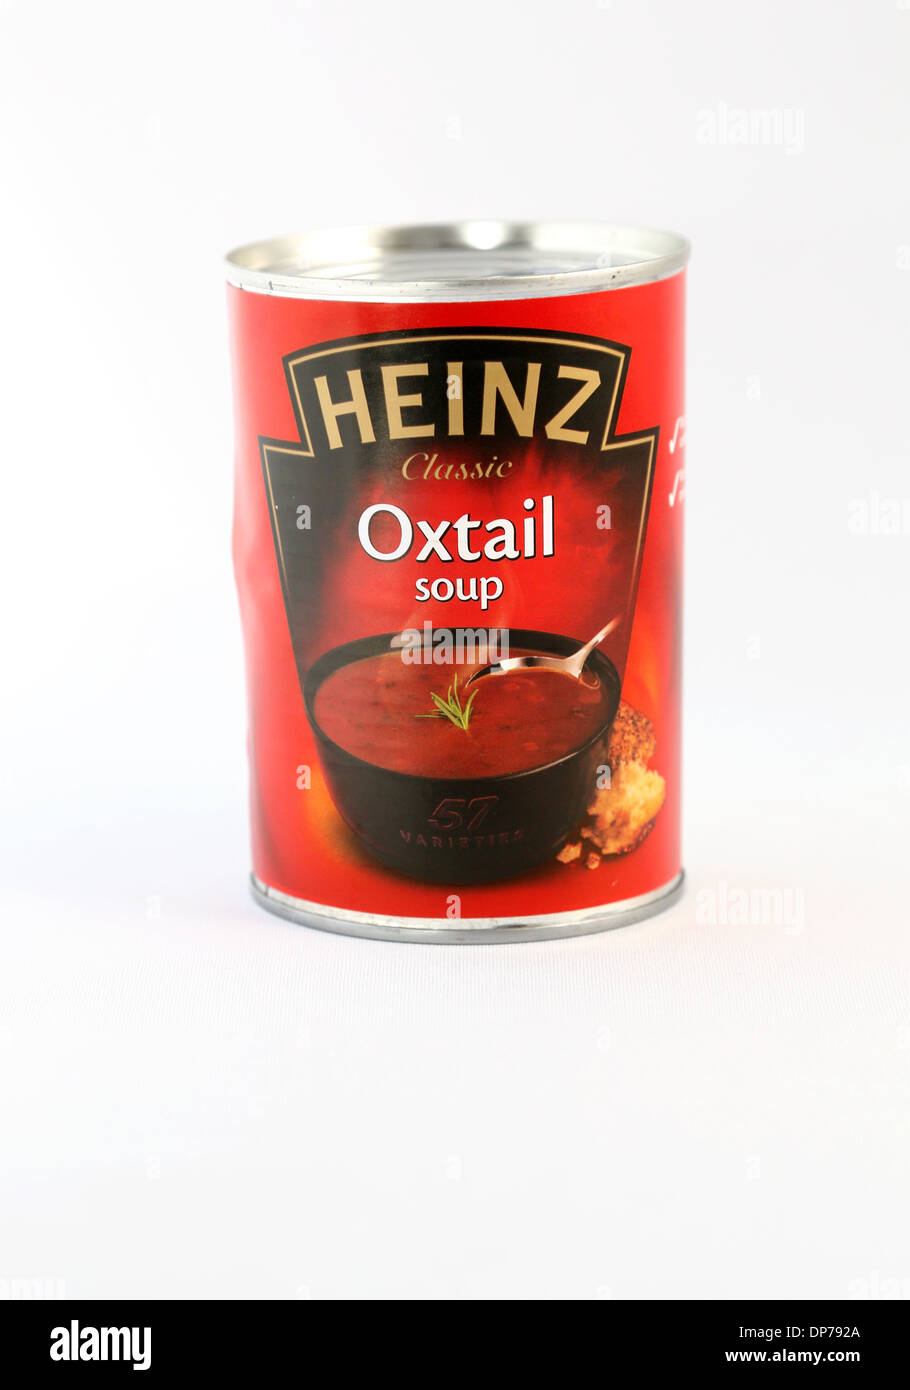 Heinz Classic cans of oxtail soup Stock Photo